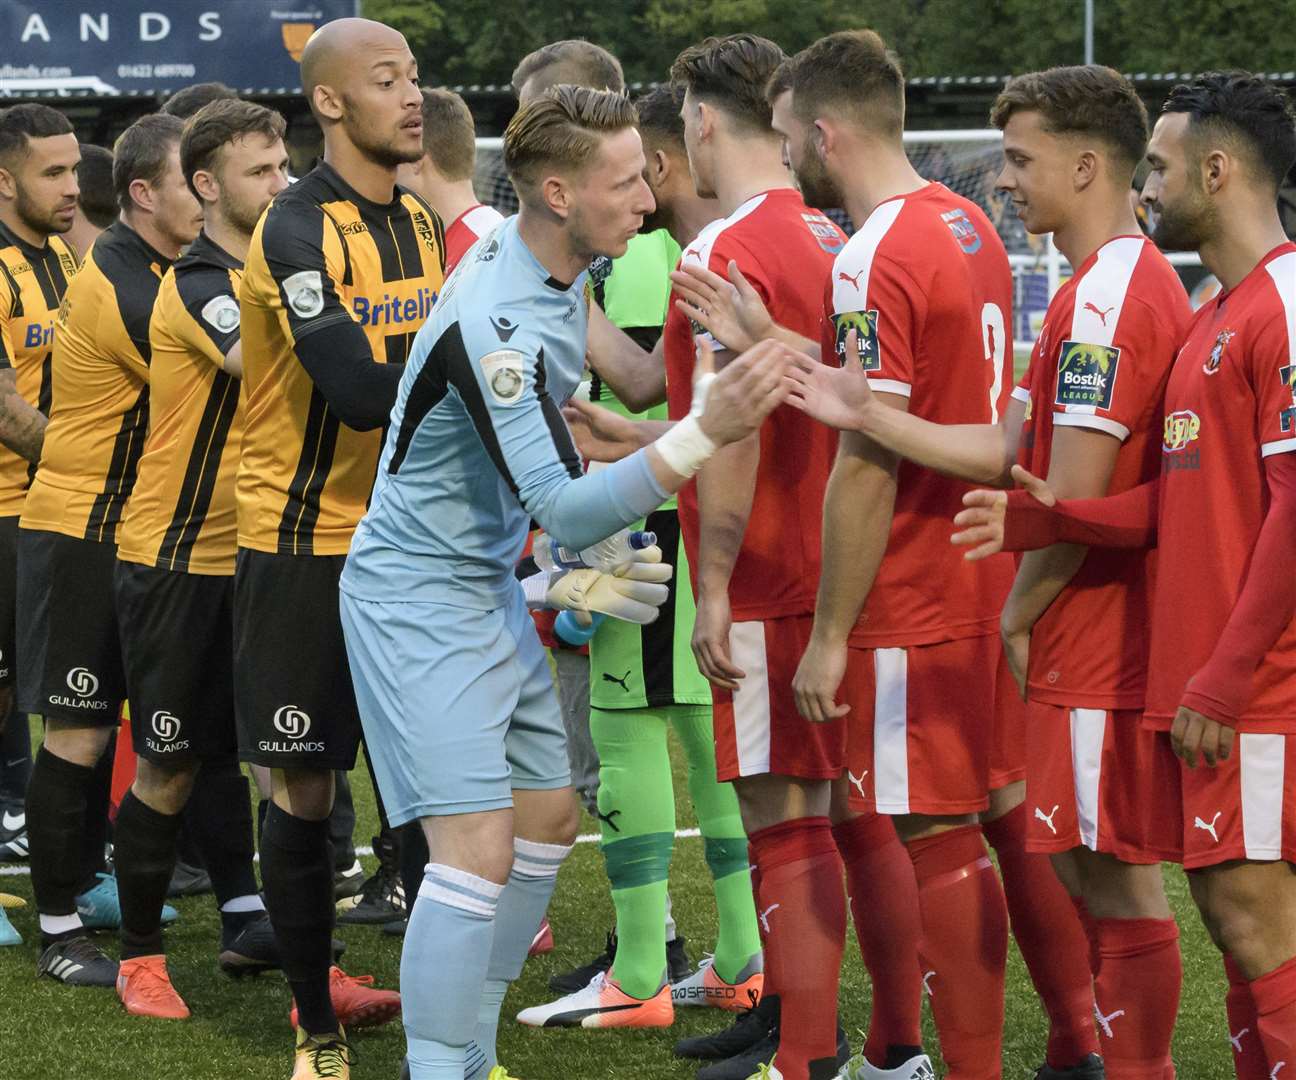 Skipper Lee Worgan leads Maidstone in the pre-match handshakes Picture: Andy Payton